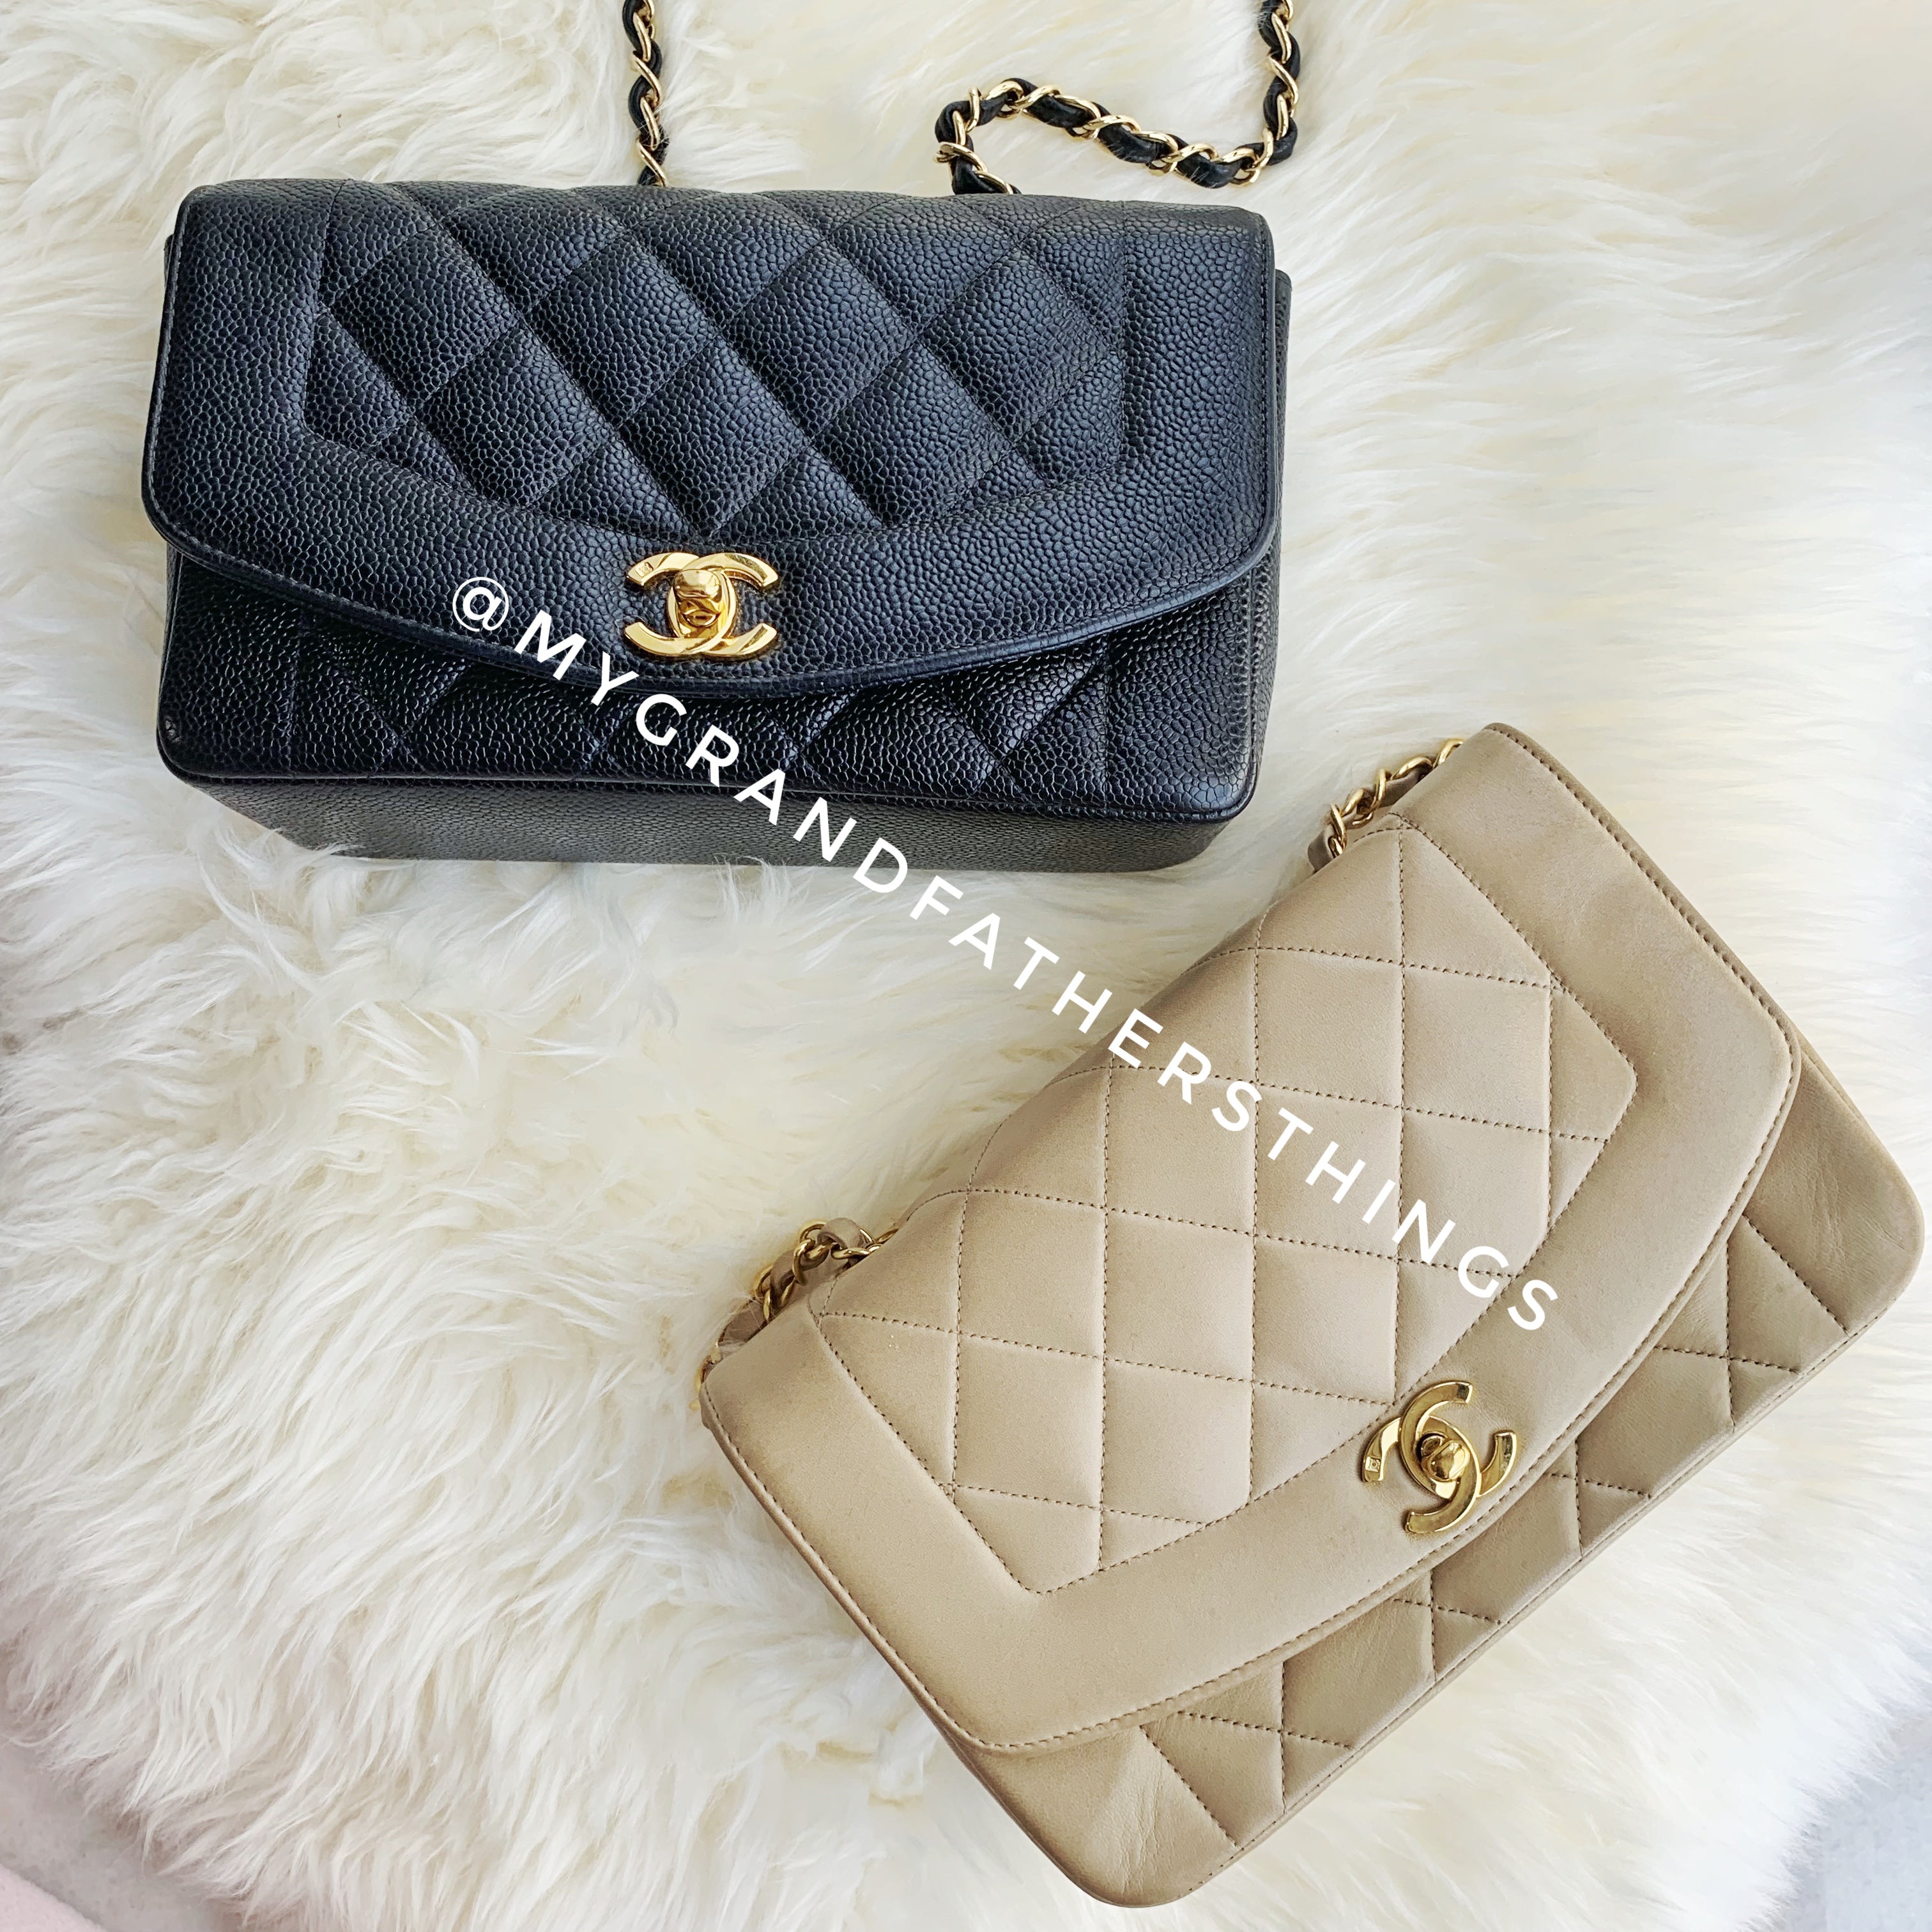 Part 1: Chanel Bags: Lambskin or Caviar? – Grandfather's Things